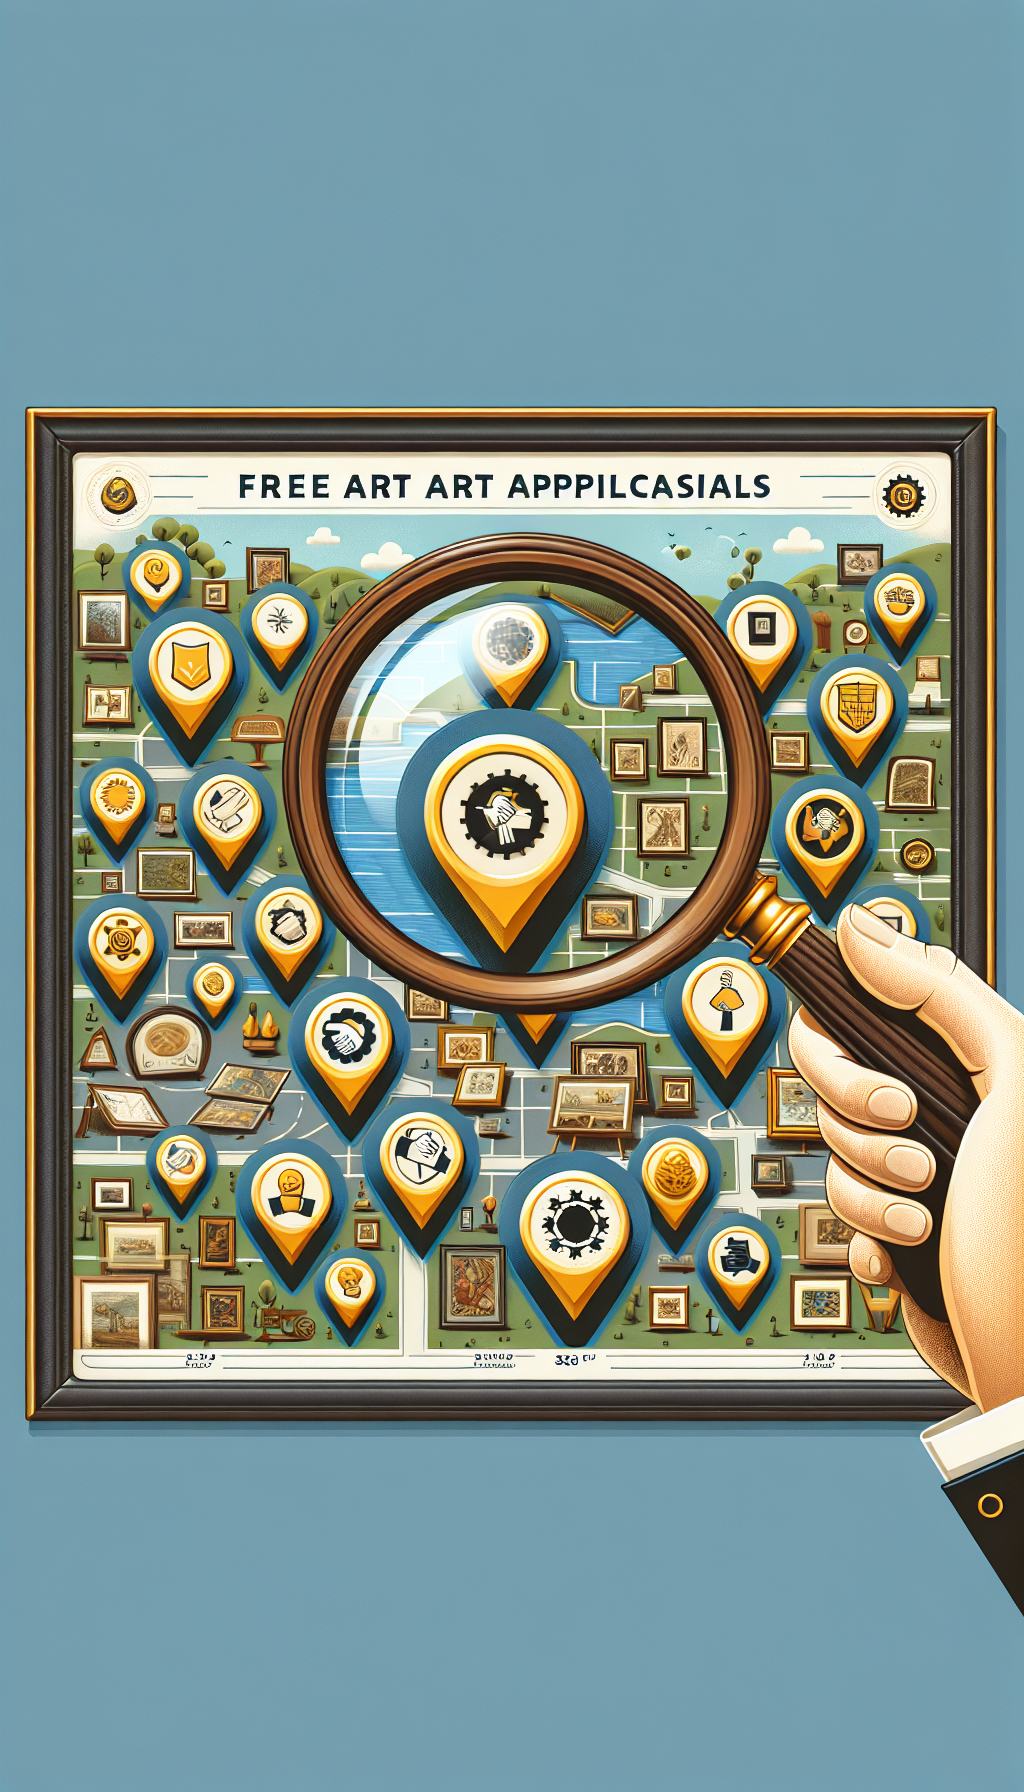 An illustration depicting a magnifying glass revealing various 'certification badges' on a map filled with art pieces, where each badge location offers 'Free Art Appraisals'. The map is situated in a friendly, local neighborhood setting, subtly reinforcing trust and credibility with golden shield symbols and handshakes integrating into the scenery. Each style shift represents a distinct appraisal specialty.